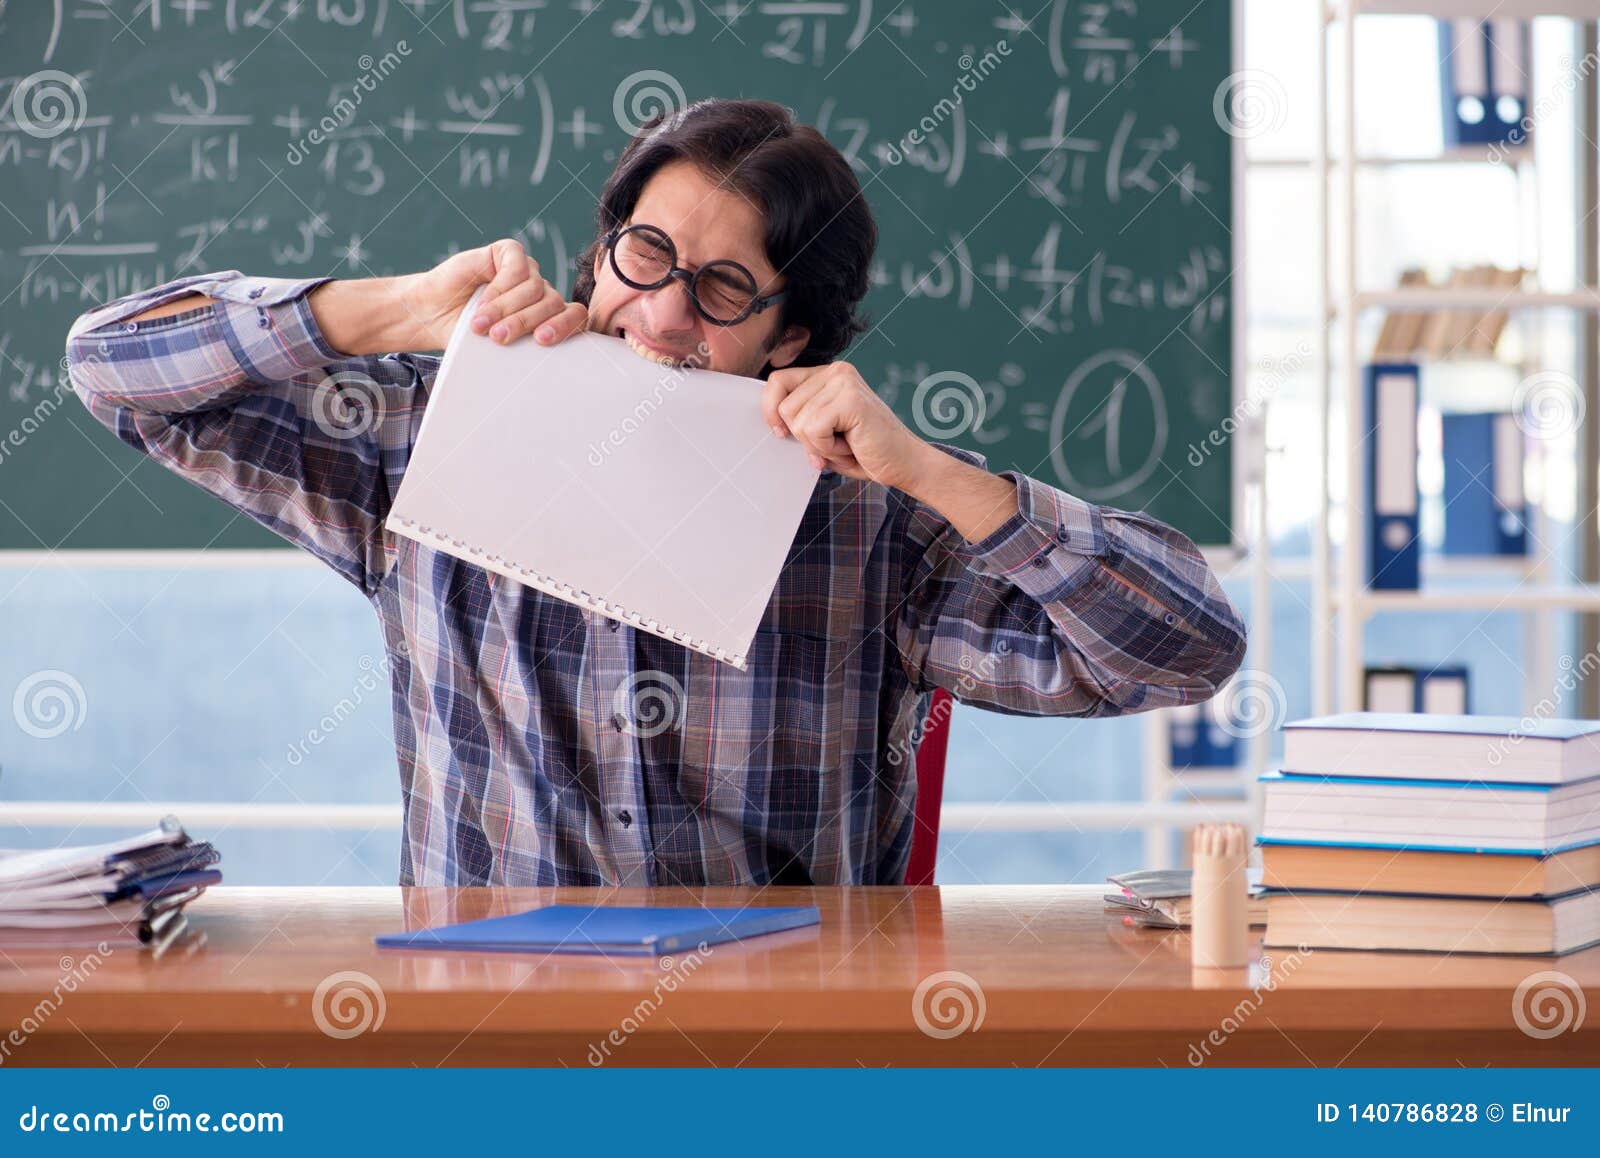 The Young Funny Math Teacher in Front of Chalkboard Stock Photo ...